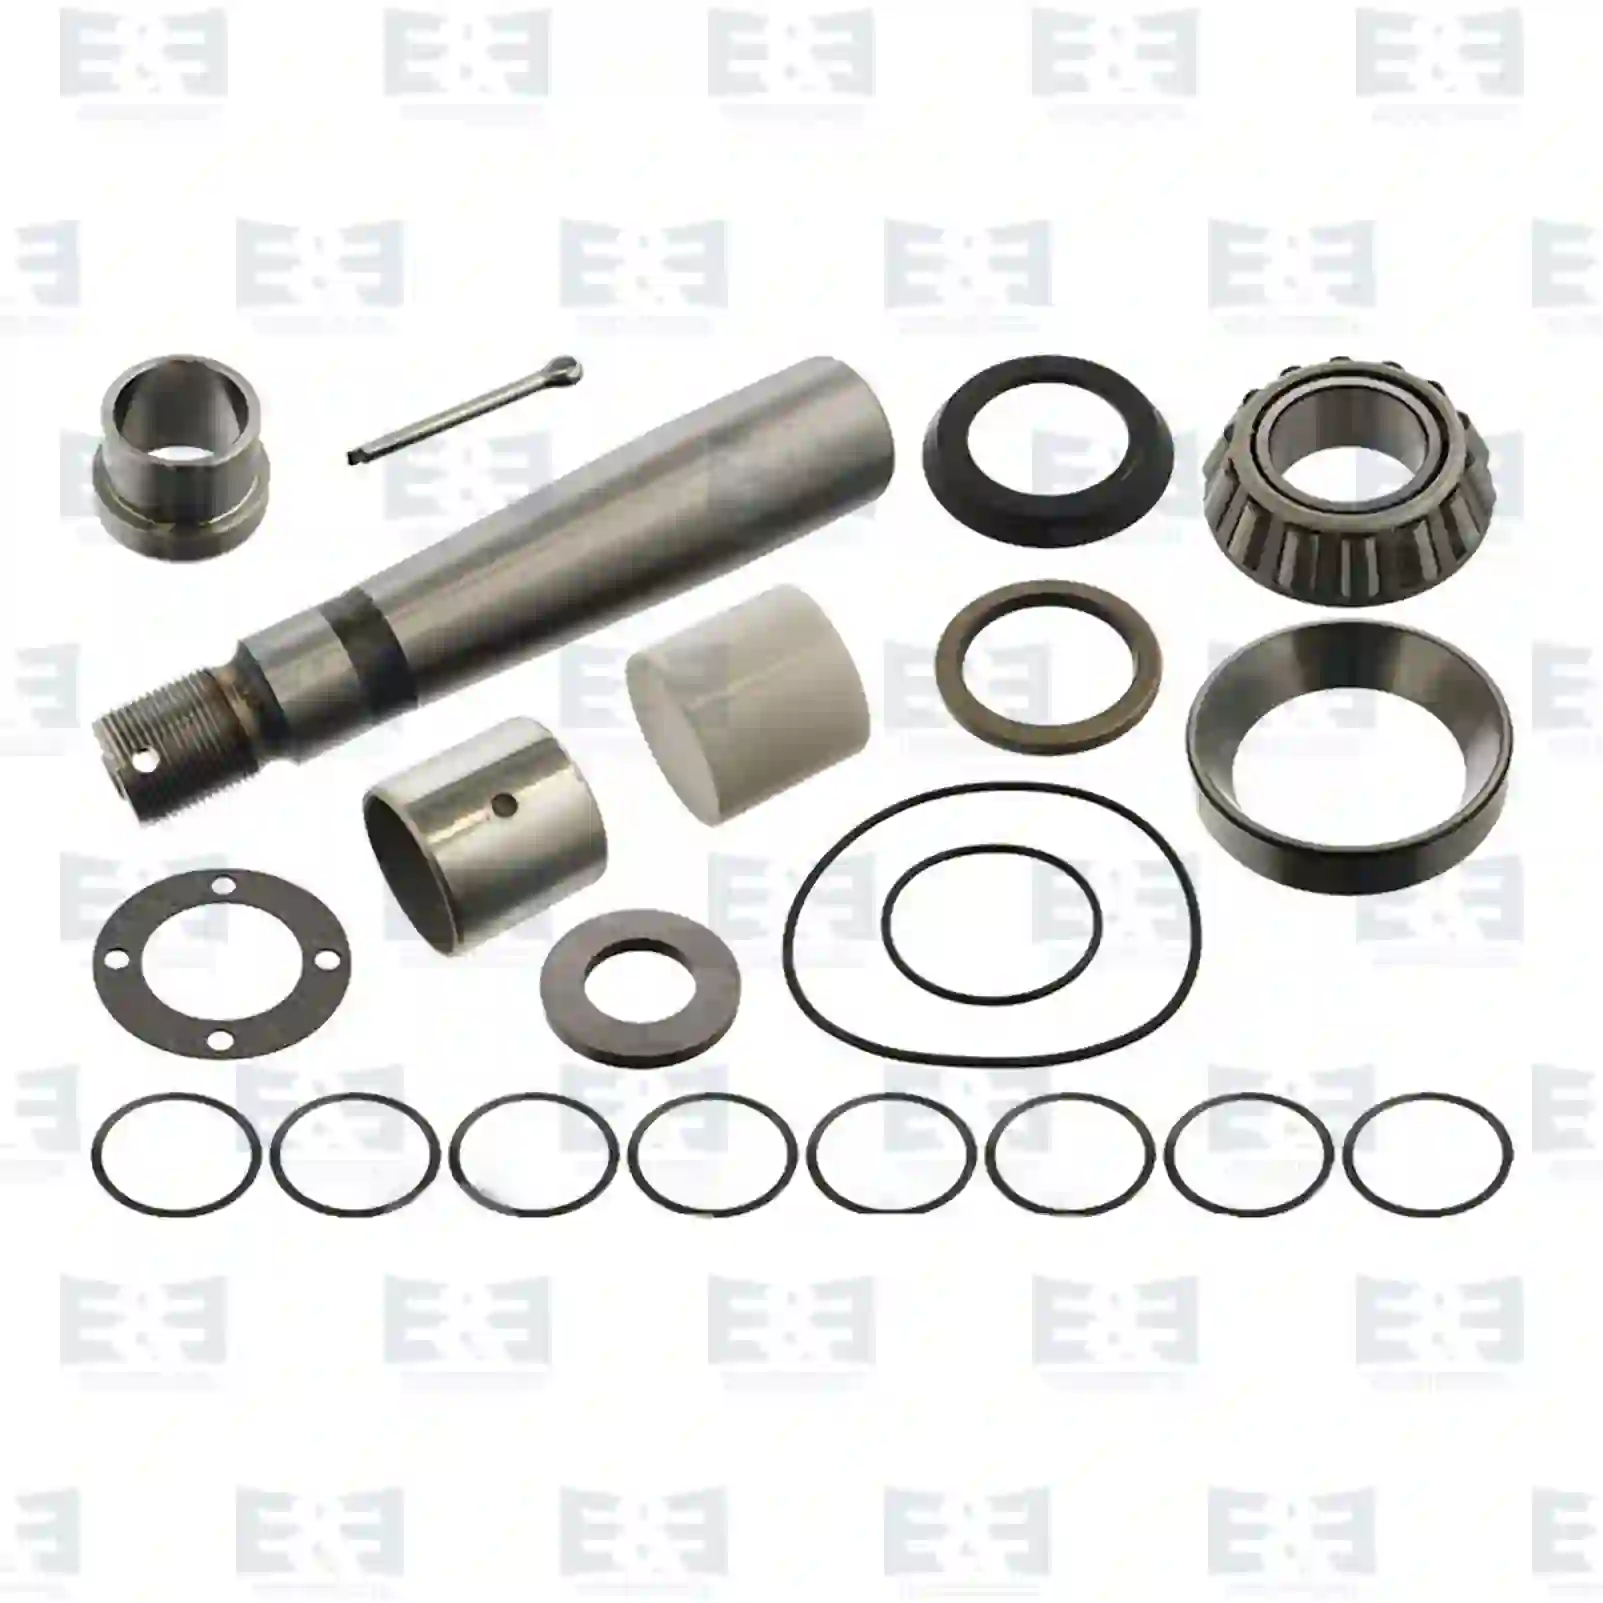 King pin kit, with bearing, 2E2279687, 271141S, 3090267S, , ||  2E2279687 E&E Truck Spare Parts | Truck Spare Parts, Auotomotive Spare Parts King pin kit, with bearing, 2E2279687, 271141S, 3090267S, , ||  2E2279687 E&E Truck Spare Parts | Truck Spare Parts, Auotomotive Spare Parts